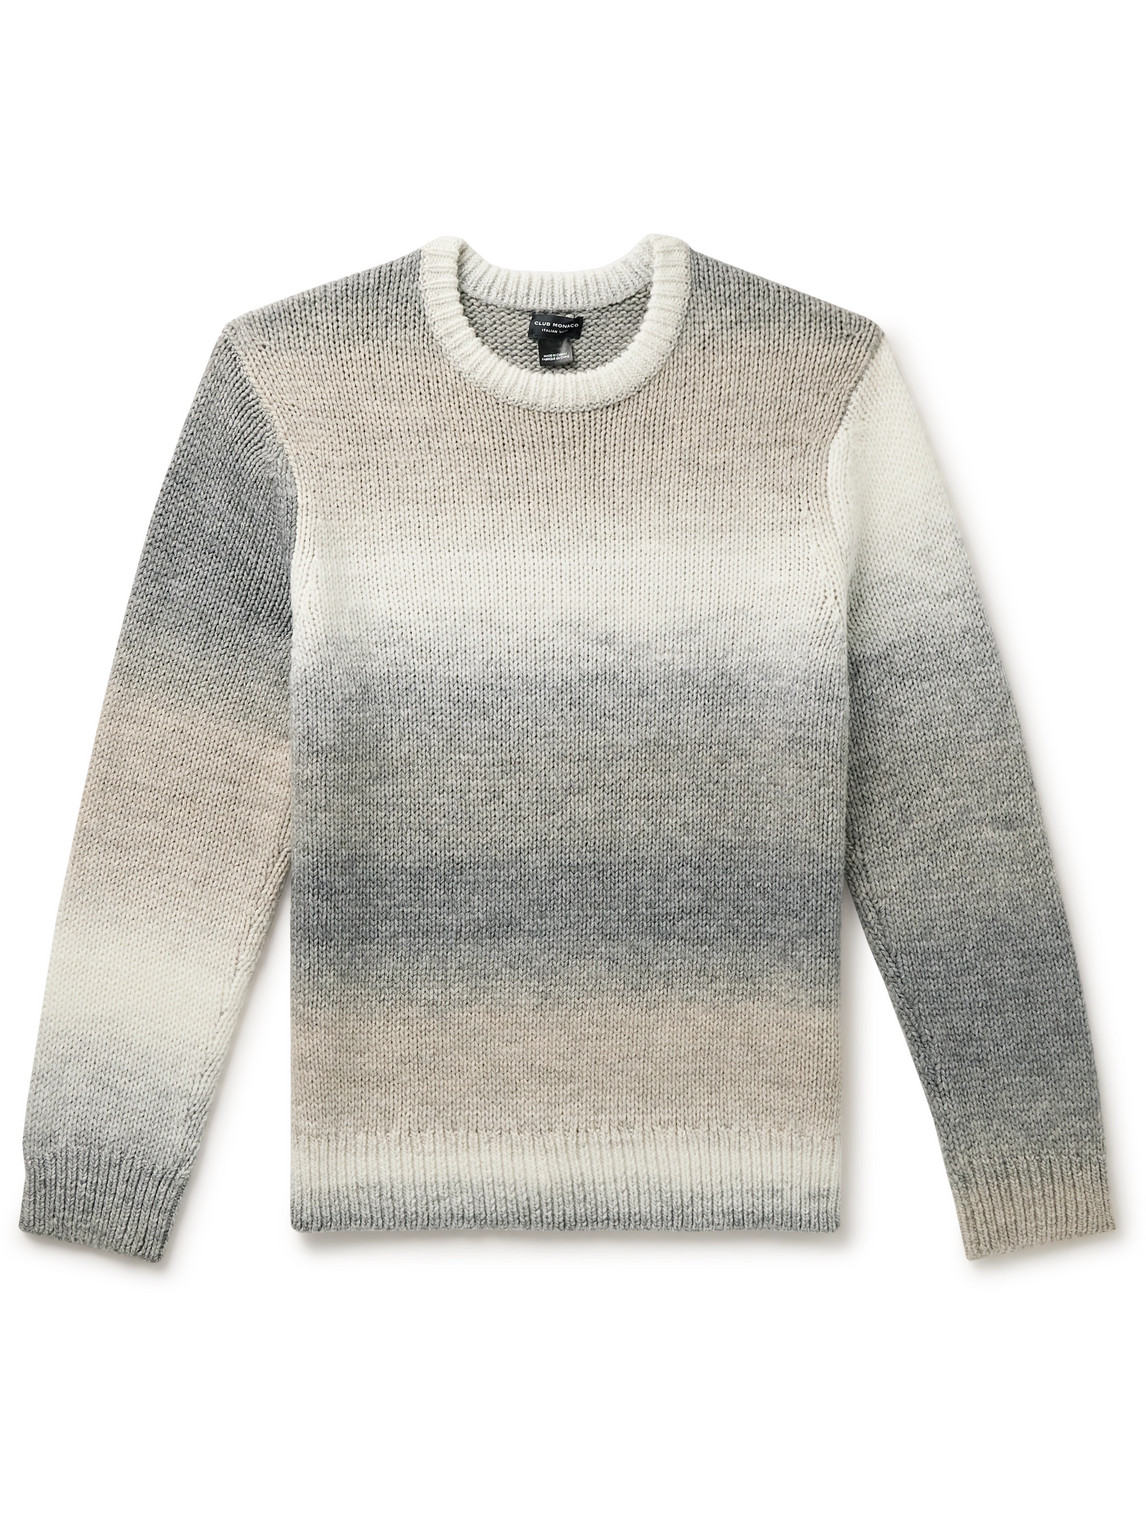 Club Monaco Dégradé Knitted Sweater In Gray